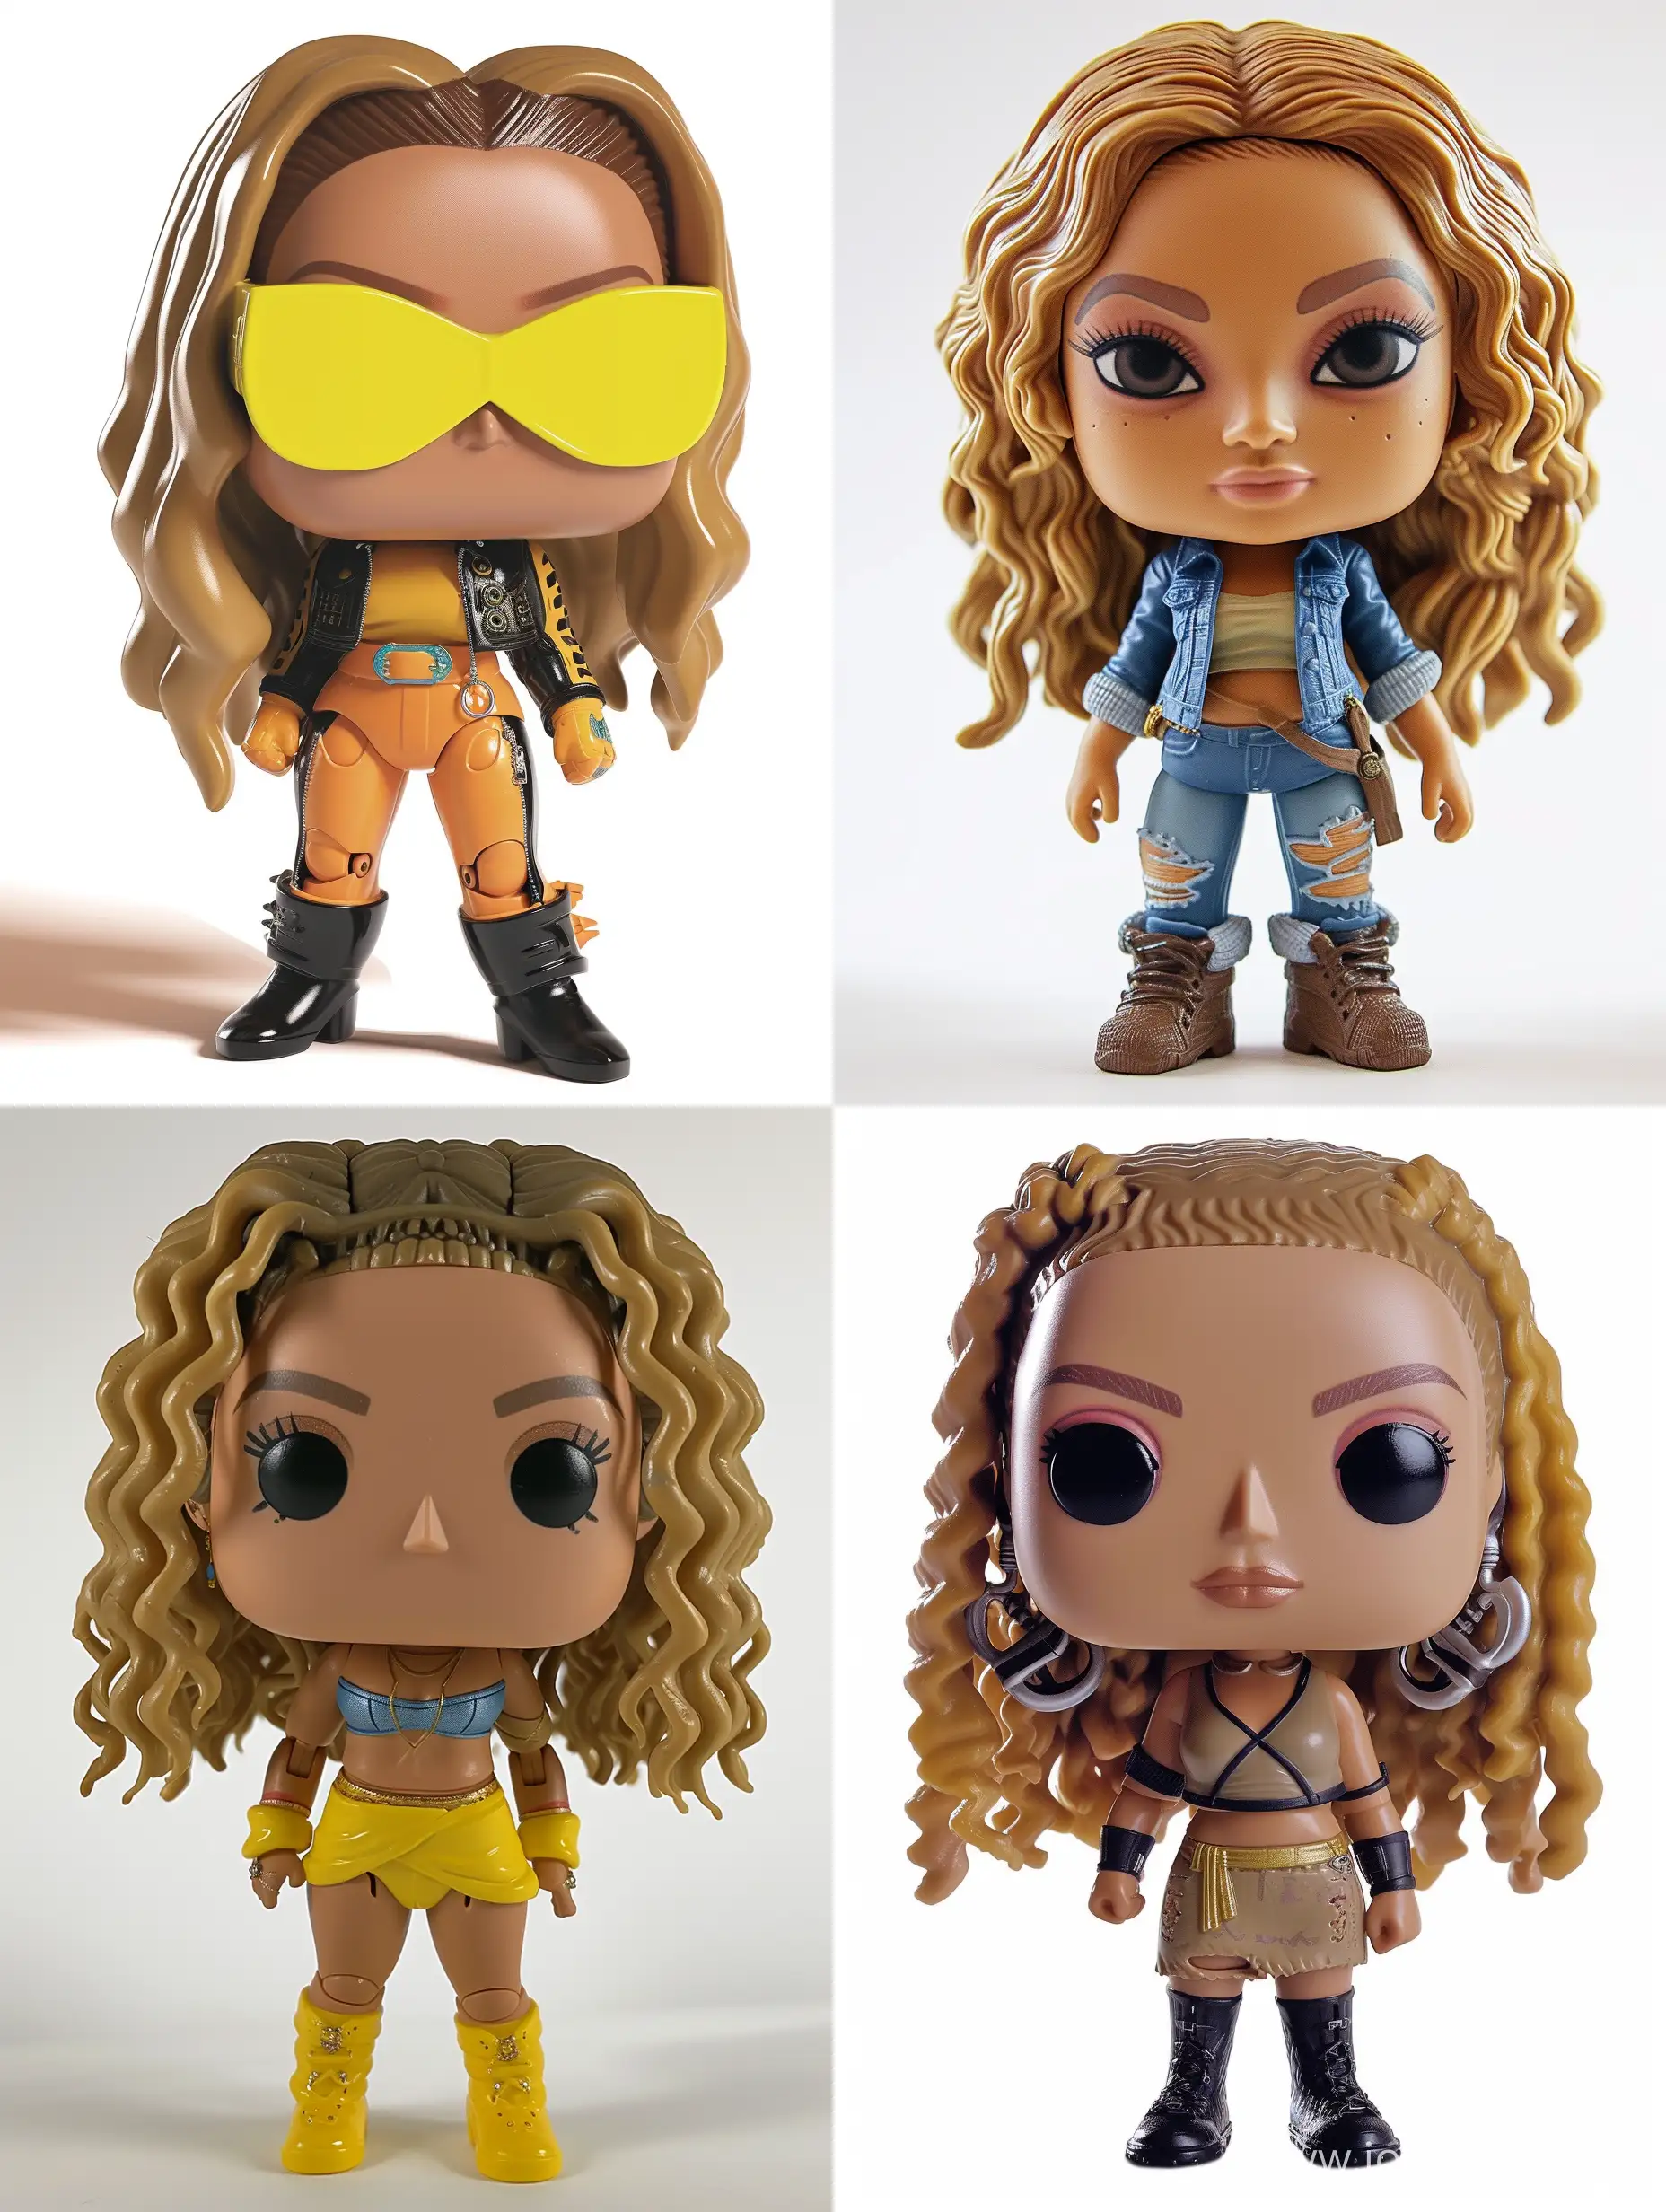 Beyonc-Funko-Pop-Toy-Playful-Rendition-in-34-Aspect-Ratio